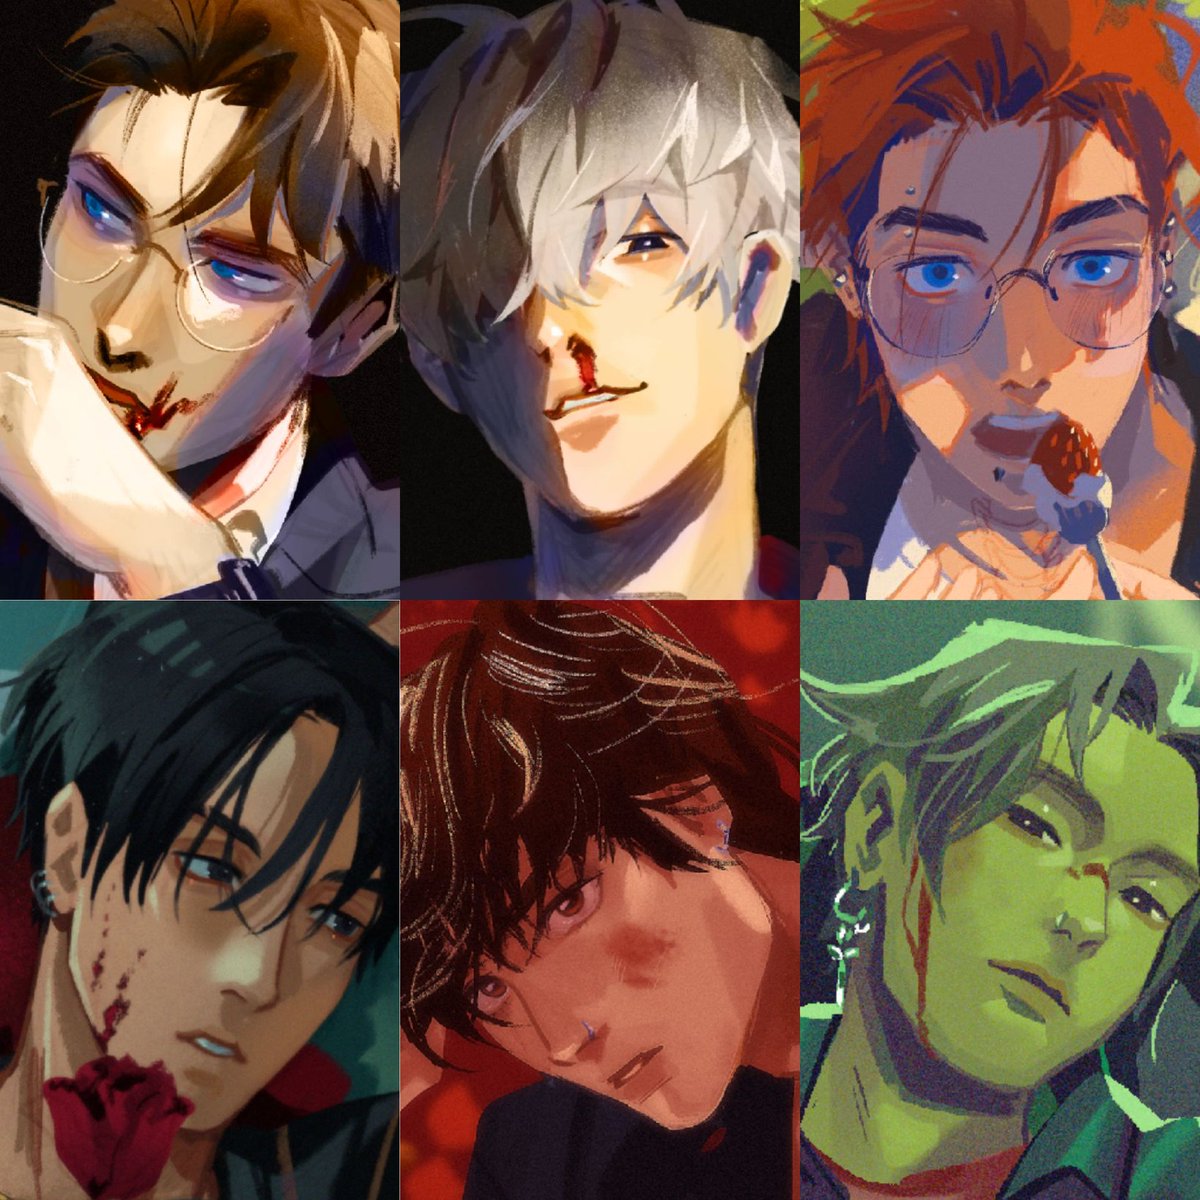 A bit late for #faceyourart but I may be seeing a pattern here 🧐